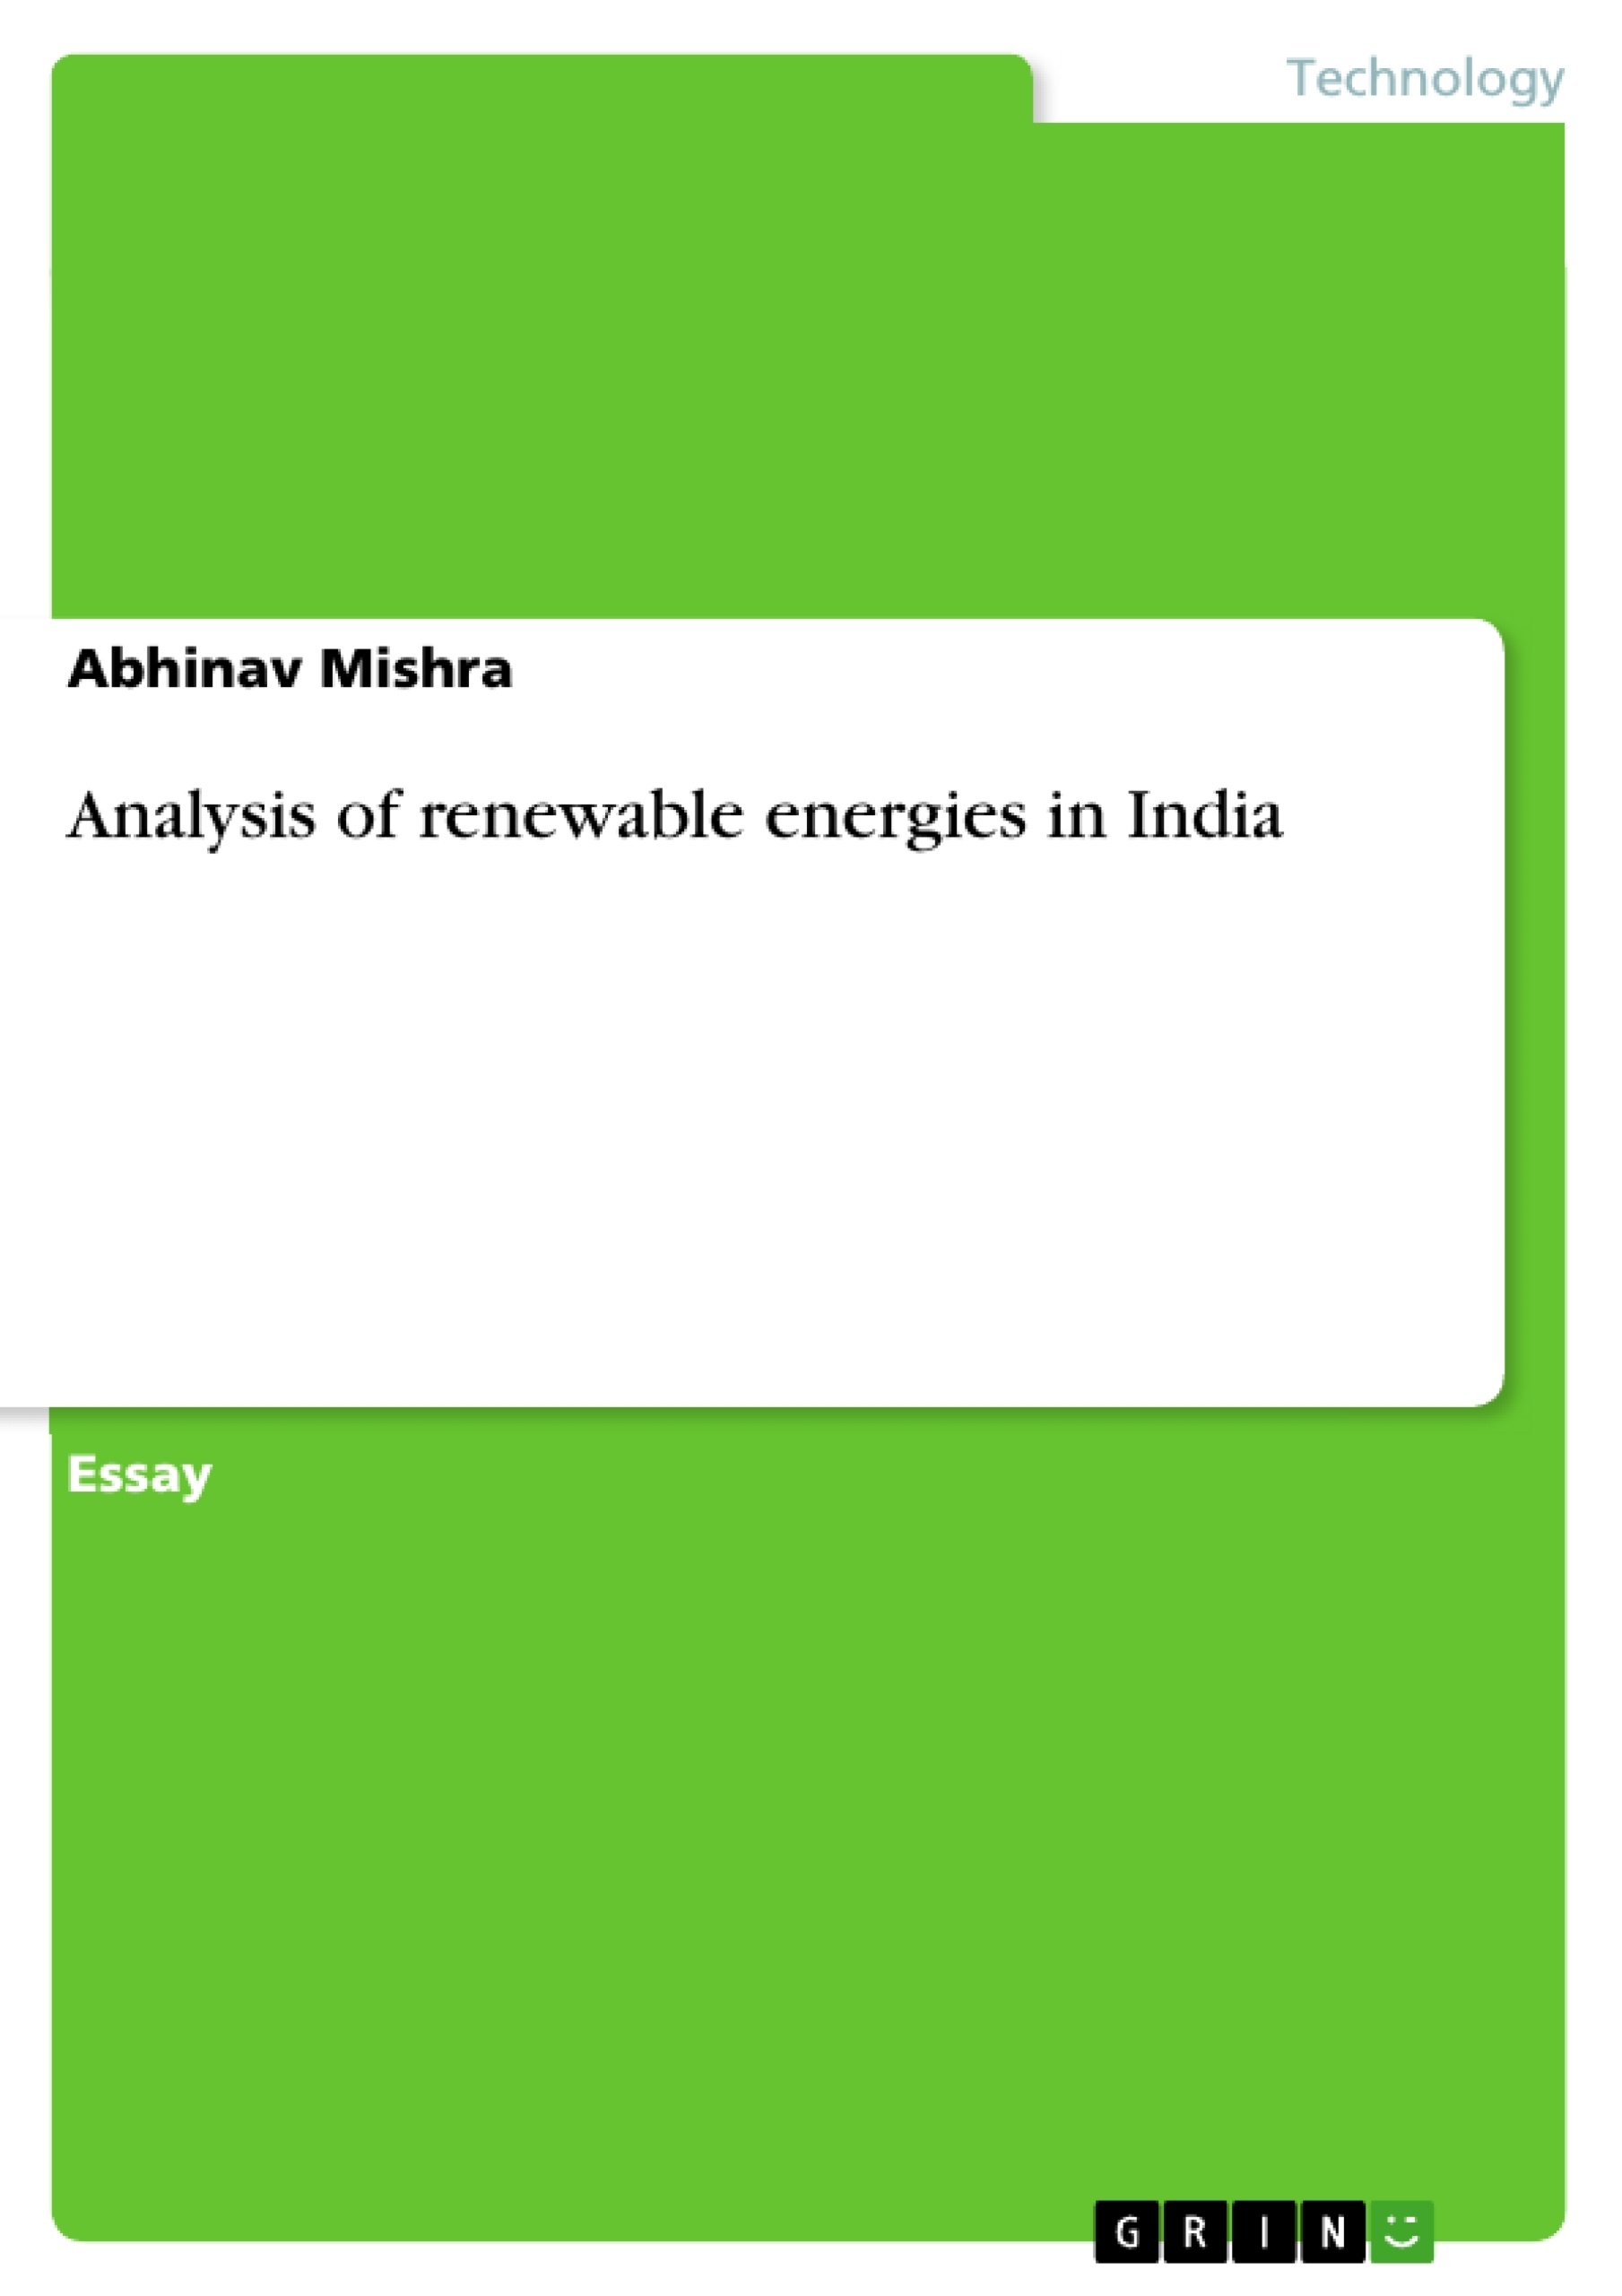 Title: Analysis of renewable energies in India